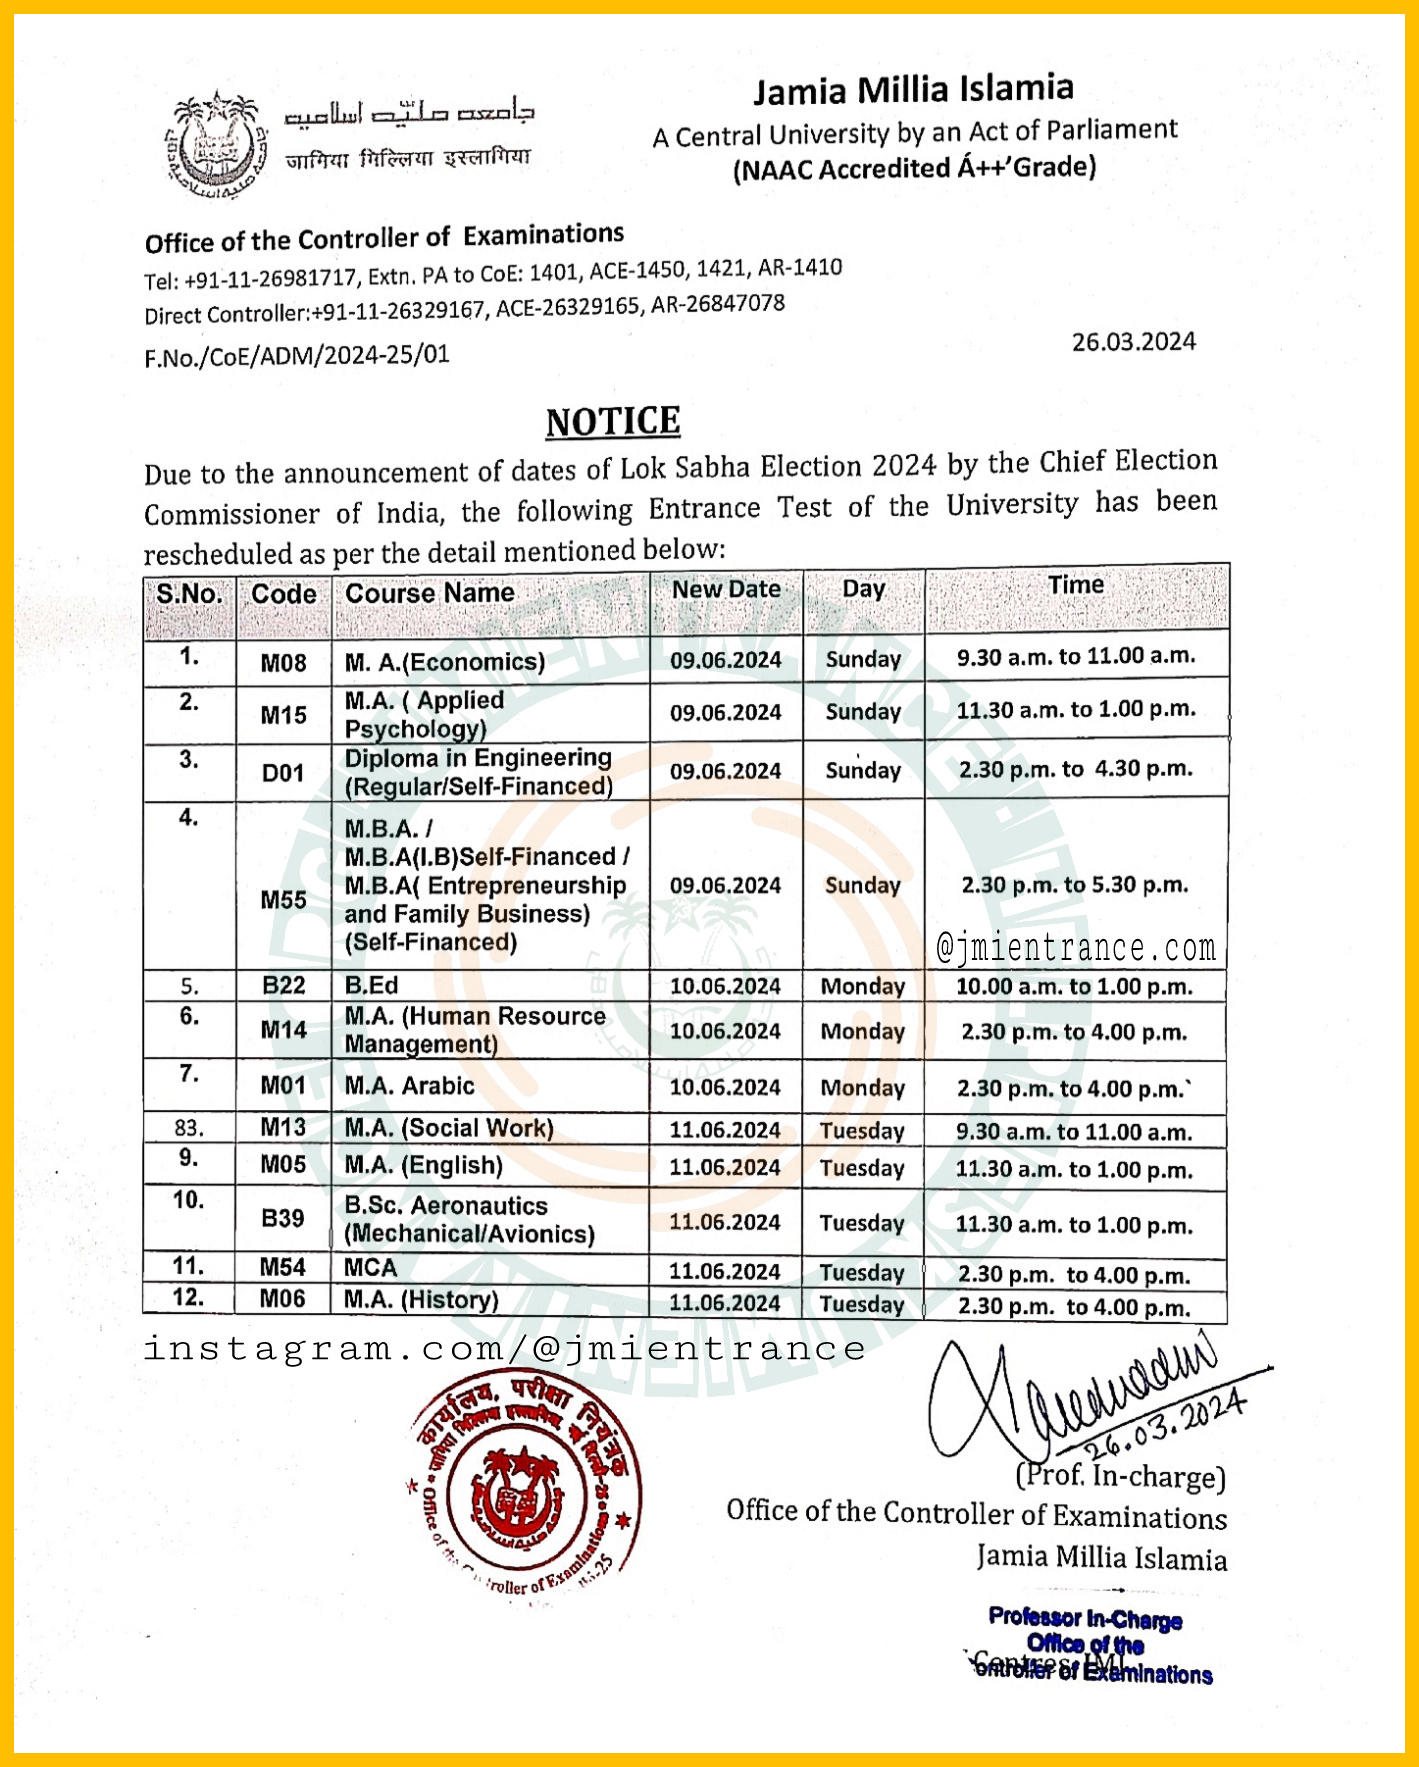 JMI Entrance Date Changed due to Lok Sabha Elections 2024